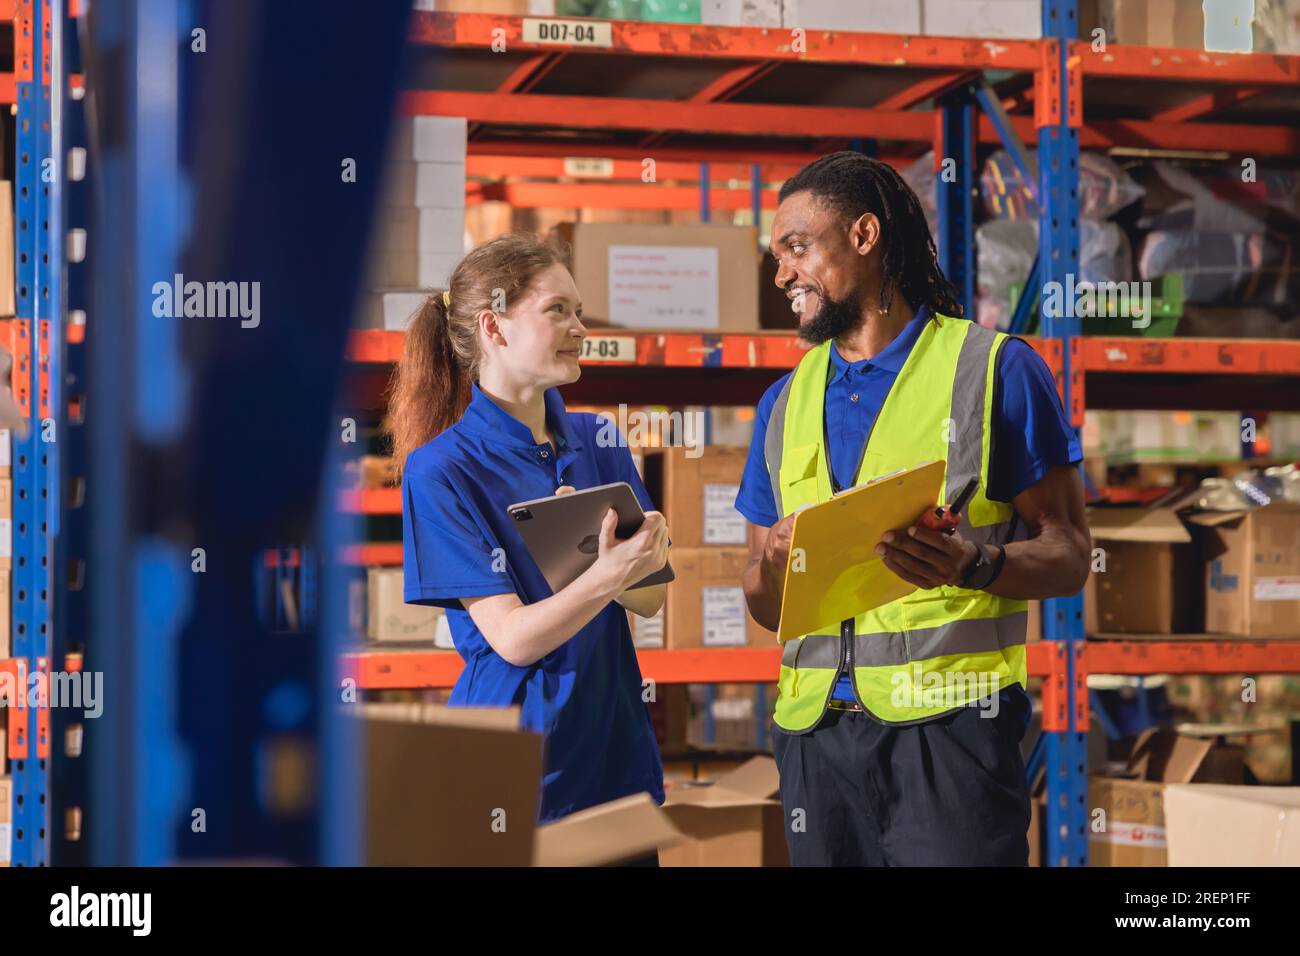 warehouse inventory worker happy working together diversity team friend at work cargo products depots Stock Photo